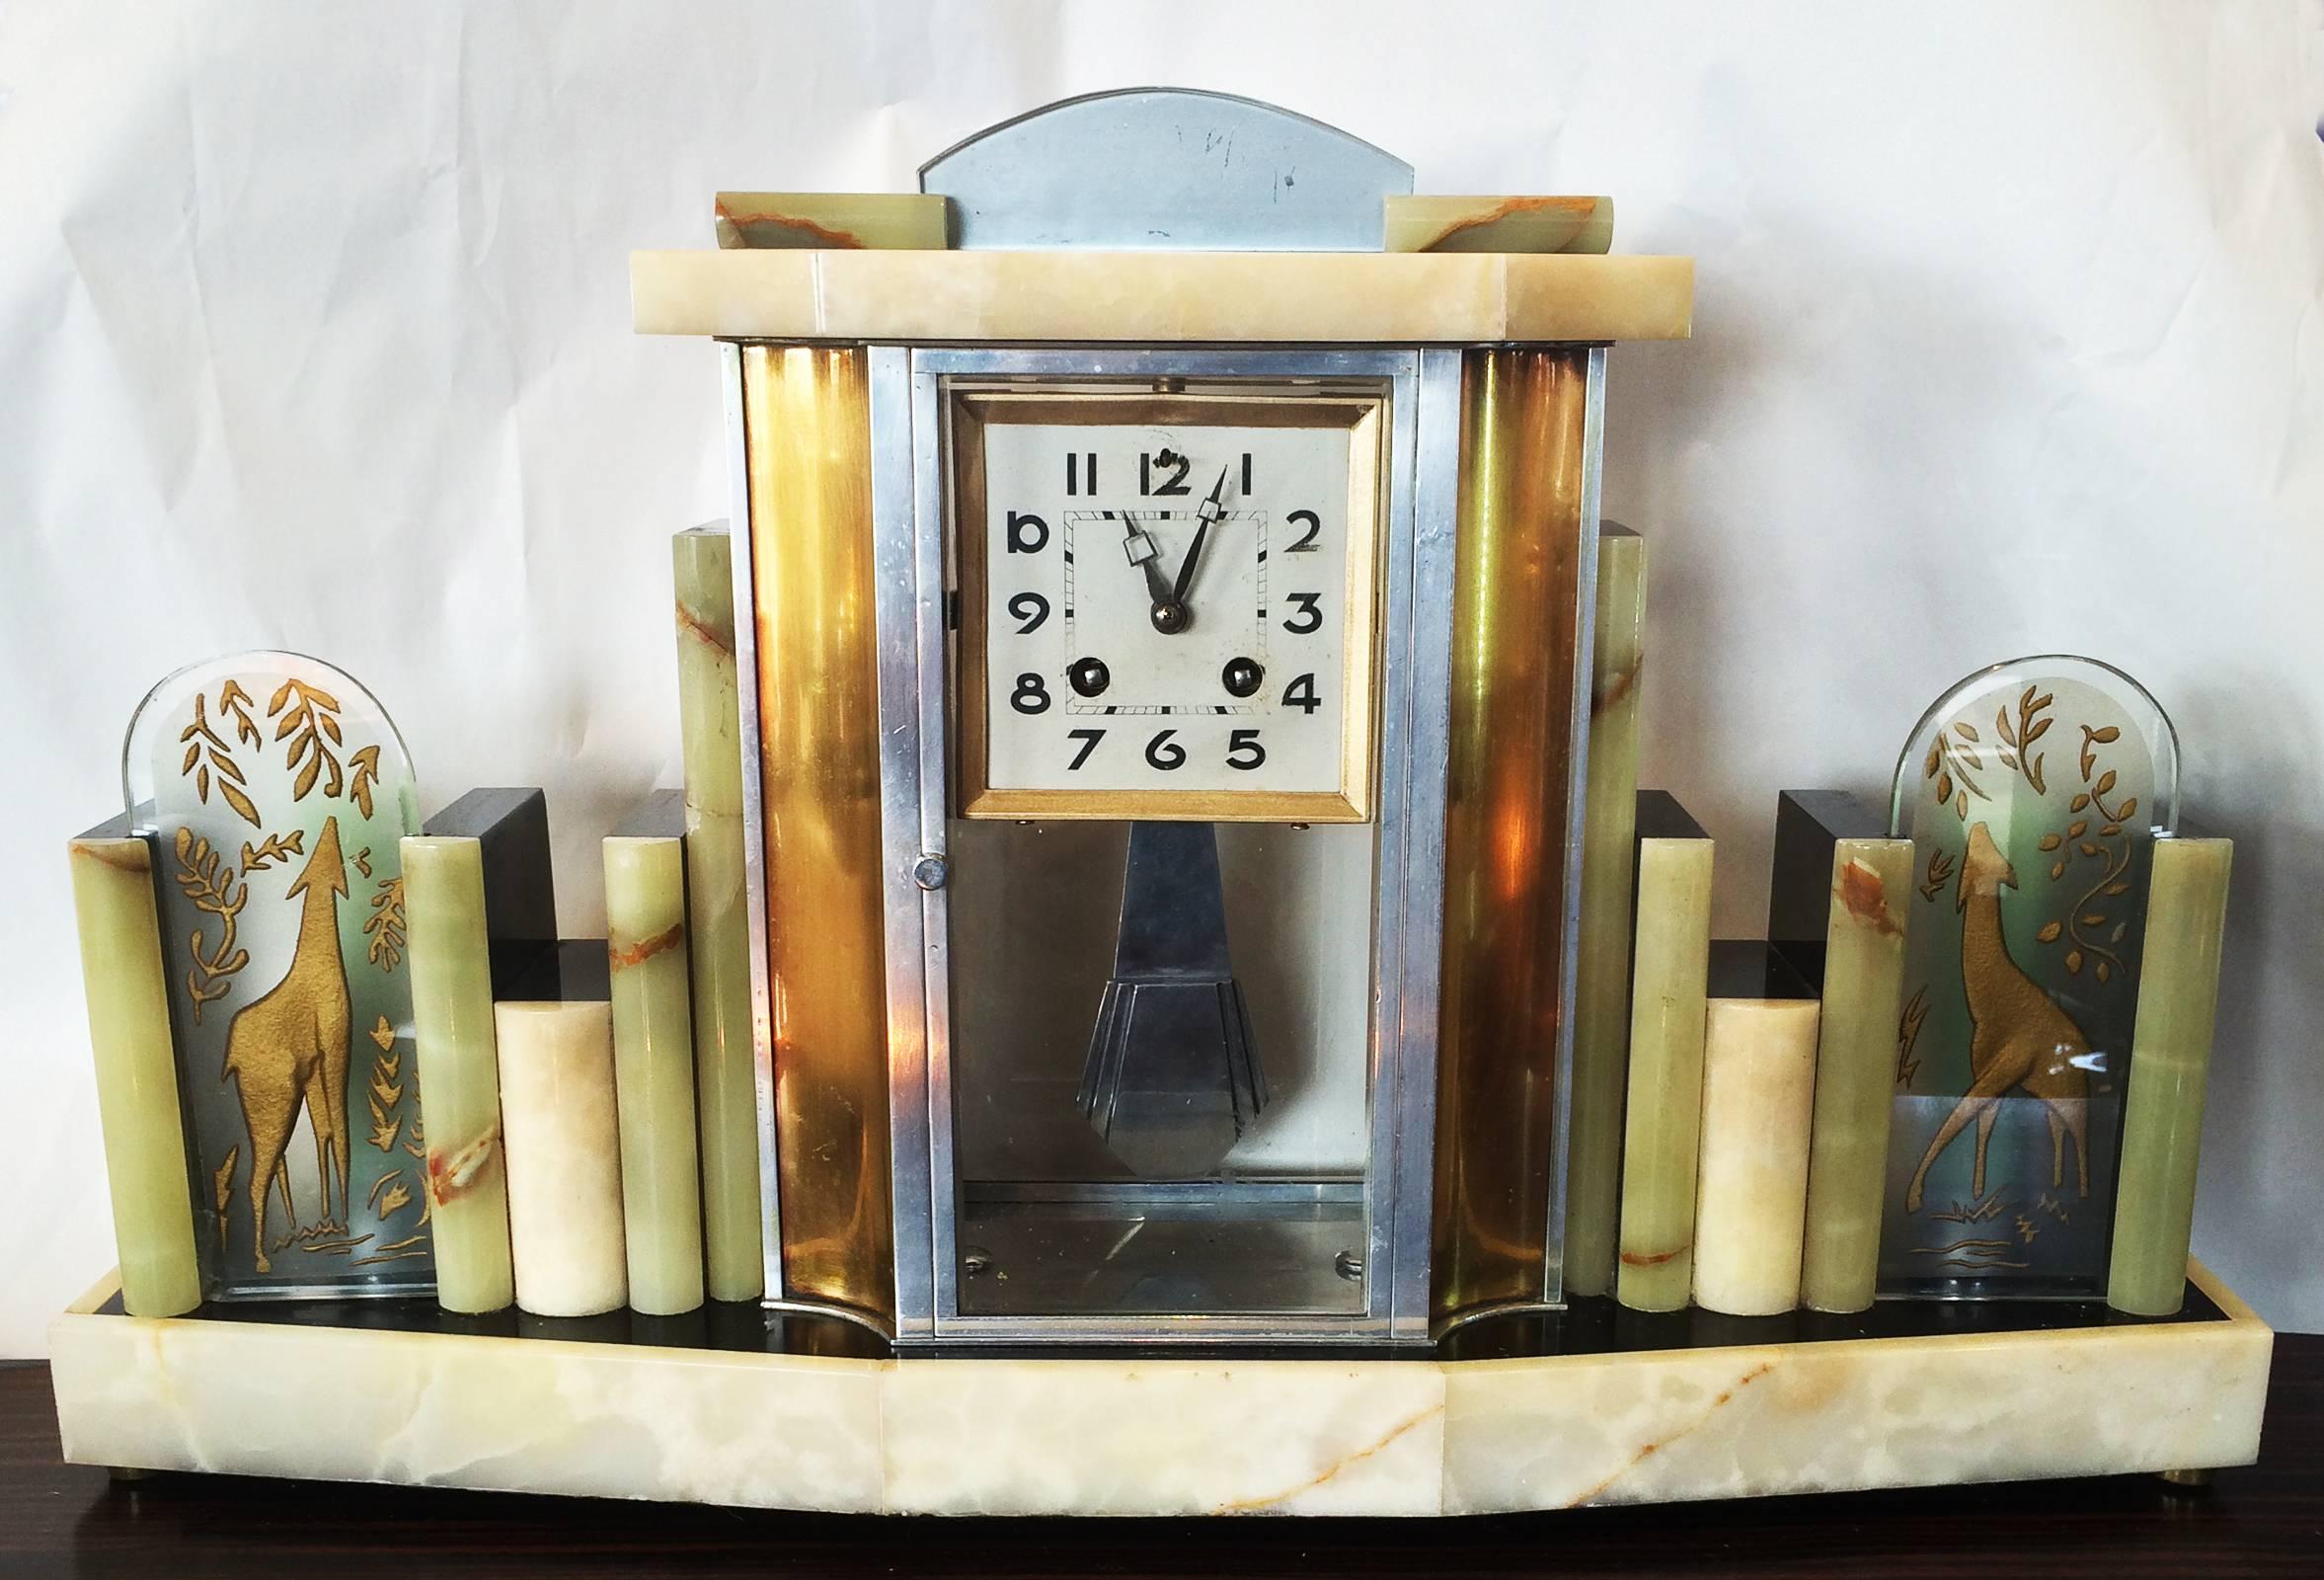 Clock of marble and alabaster, and very rare, having a low power, nightlight either side of the clock, with shades of engraved and gilt deer, eating tree foliage. An outstanding piece of design and Craftsmanship with many features, including